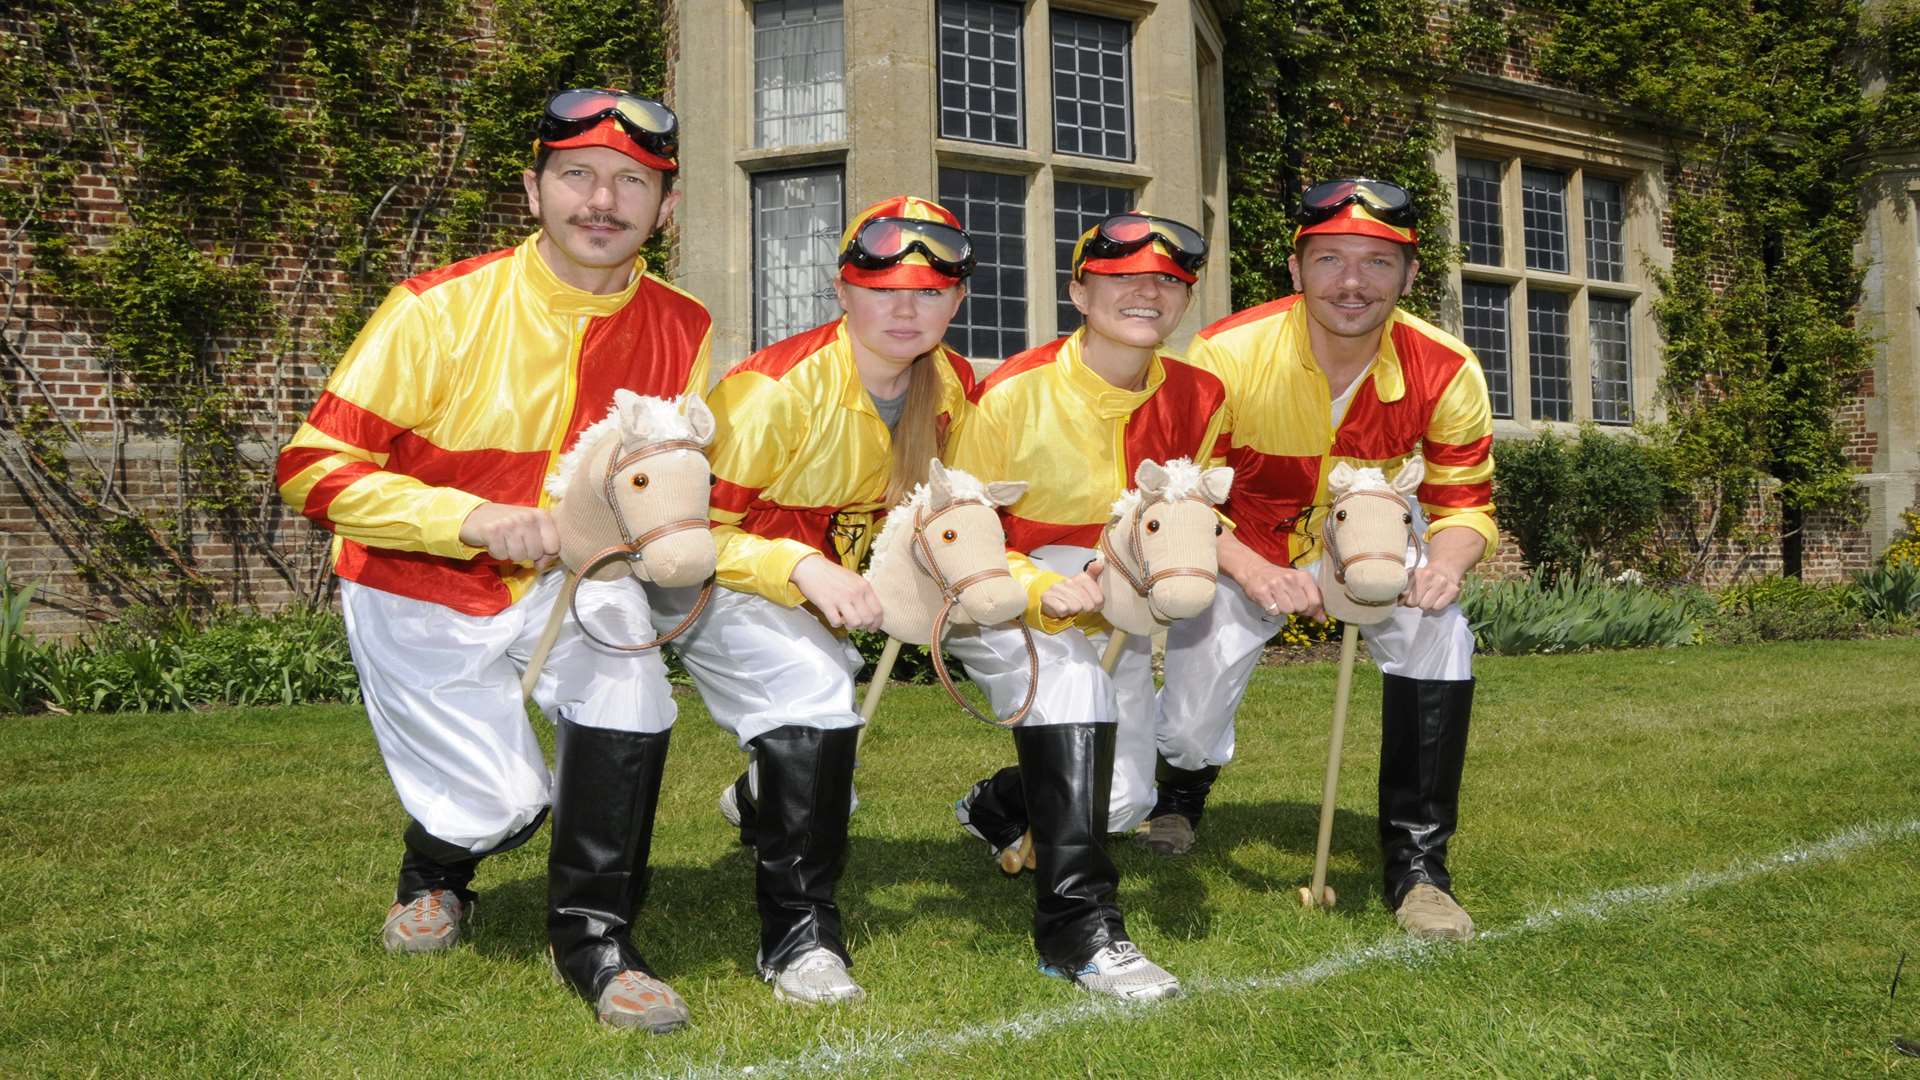 Fancy dress is the done thing at the Chilham Chase. Here's the Jockey Club from a previous year Picture: Paul Amos